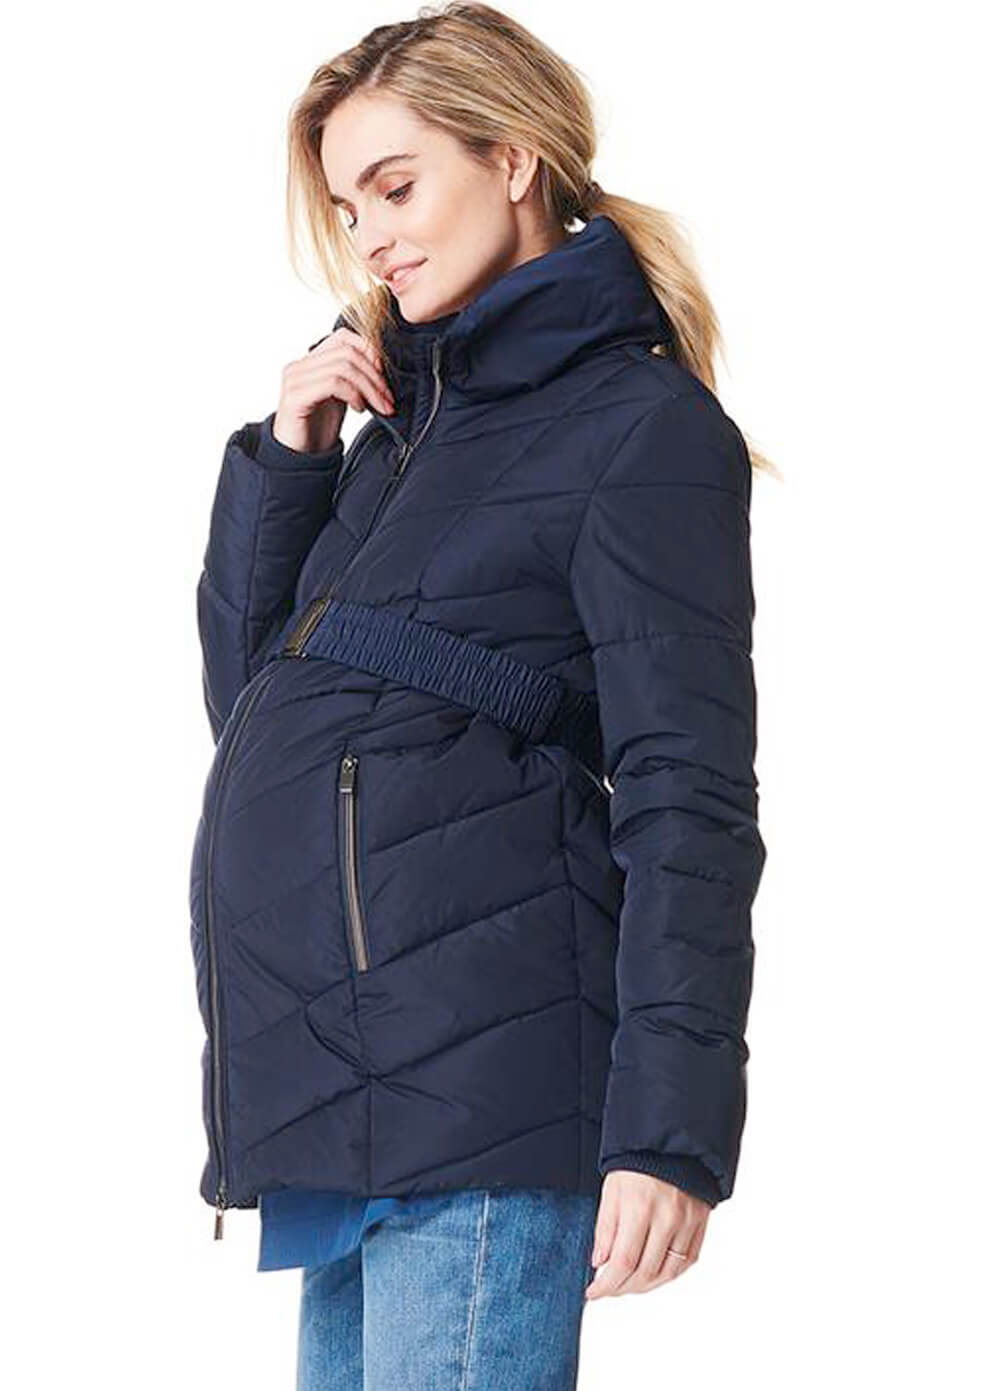 Lois Winter Maternity Coat in Navy Blue by Noppies